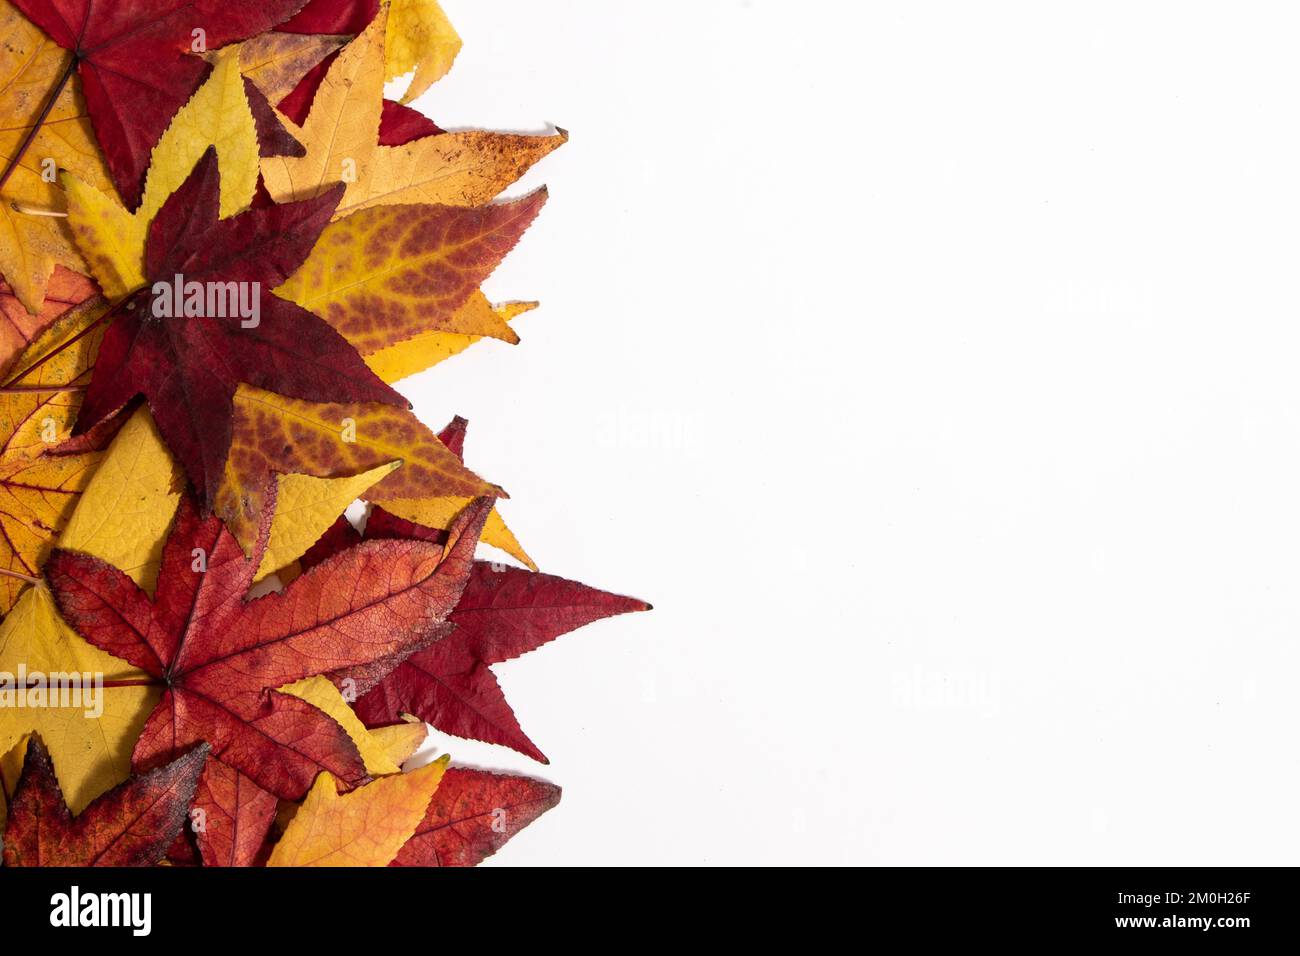 Colorful autumn leaves on white background. Flat lay. Stock Photo